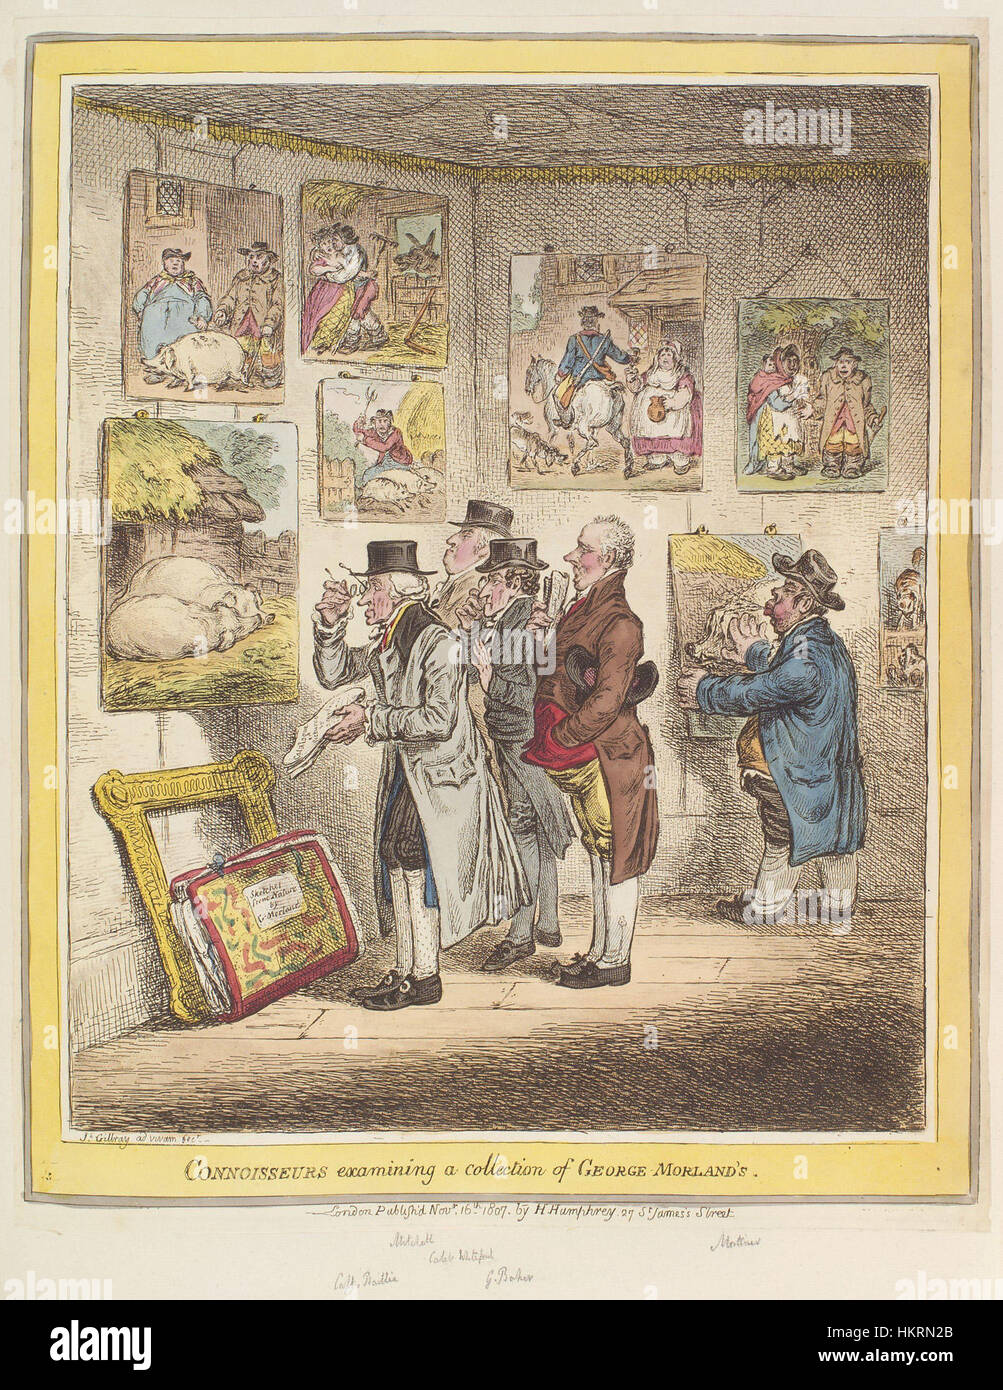 Connoisseurs examining a collection of George Moreland's by James Gillray Stock Photo